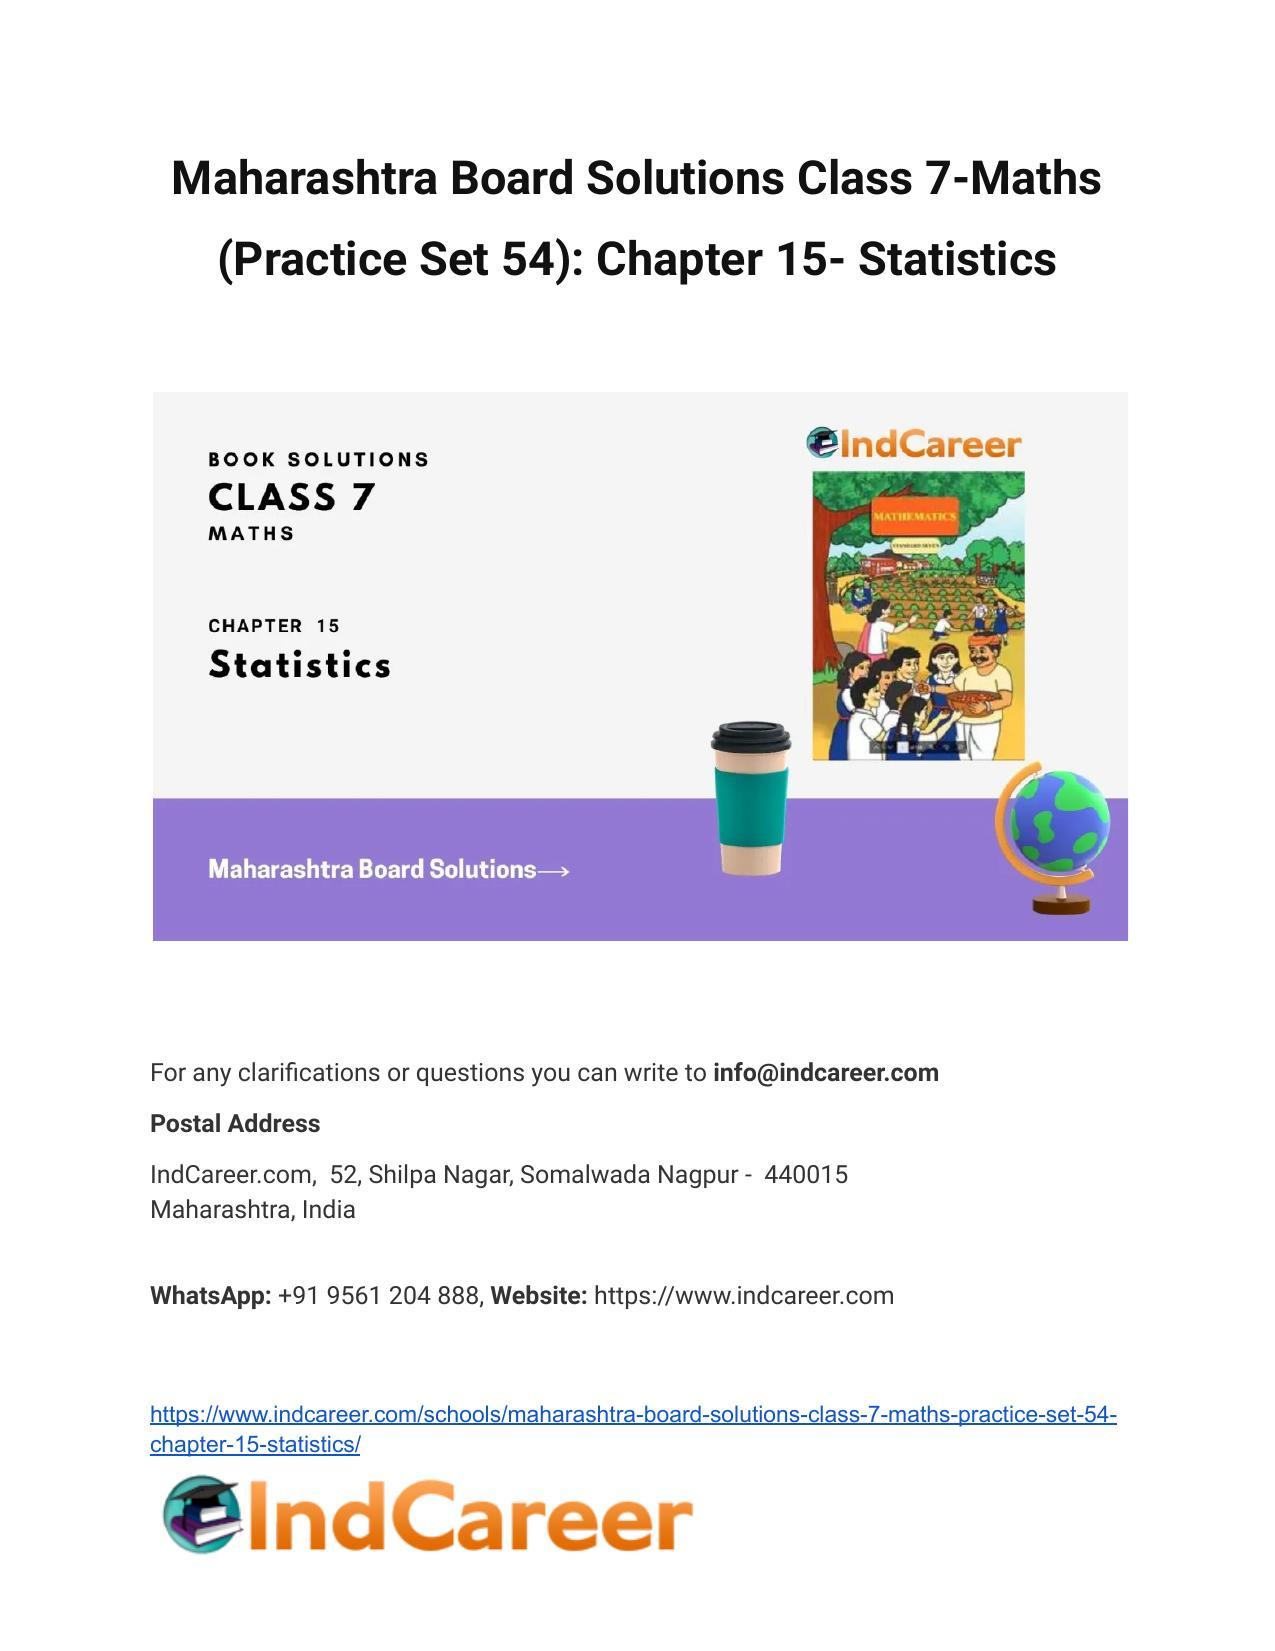 maharashtra-board-solutions-class-7-maths-practice-set-54-chapter-15